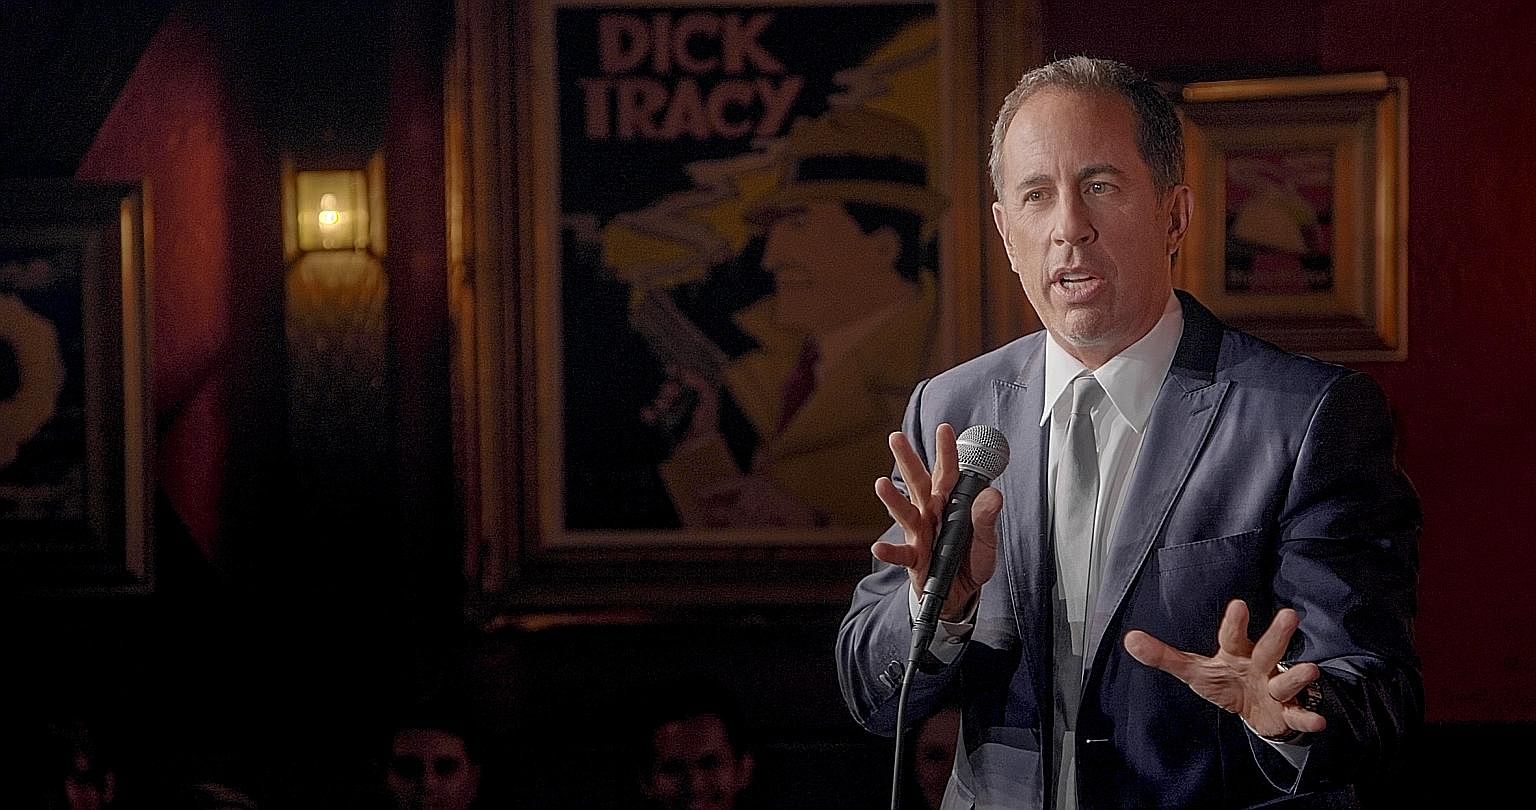 In Jerry Before Seinfeld, comedian Jerry Seinfeld returns to perform at the New York comedy club where he got his start.